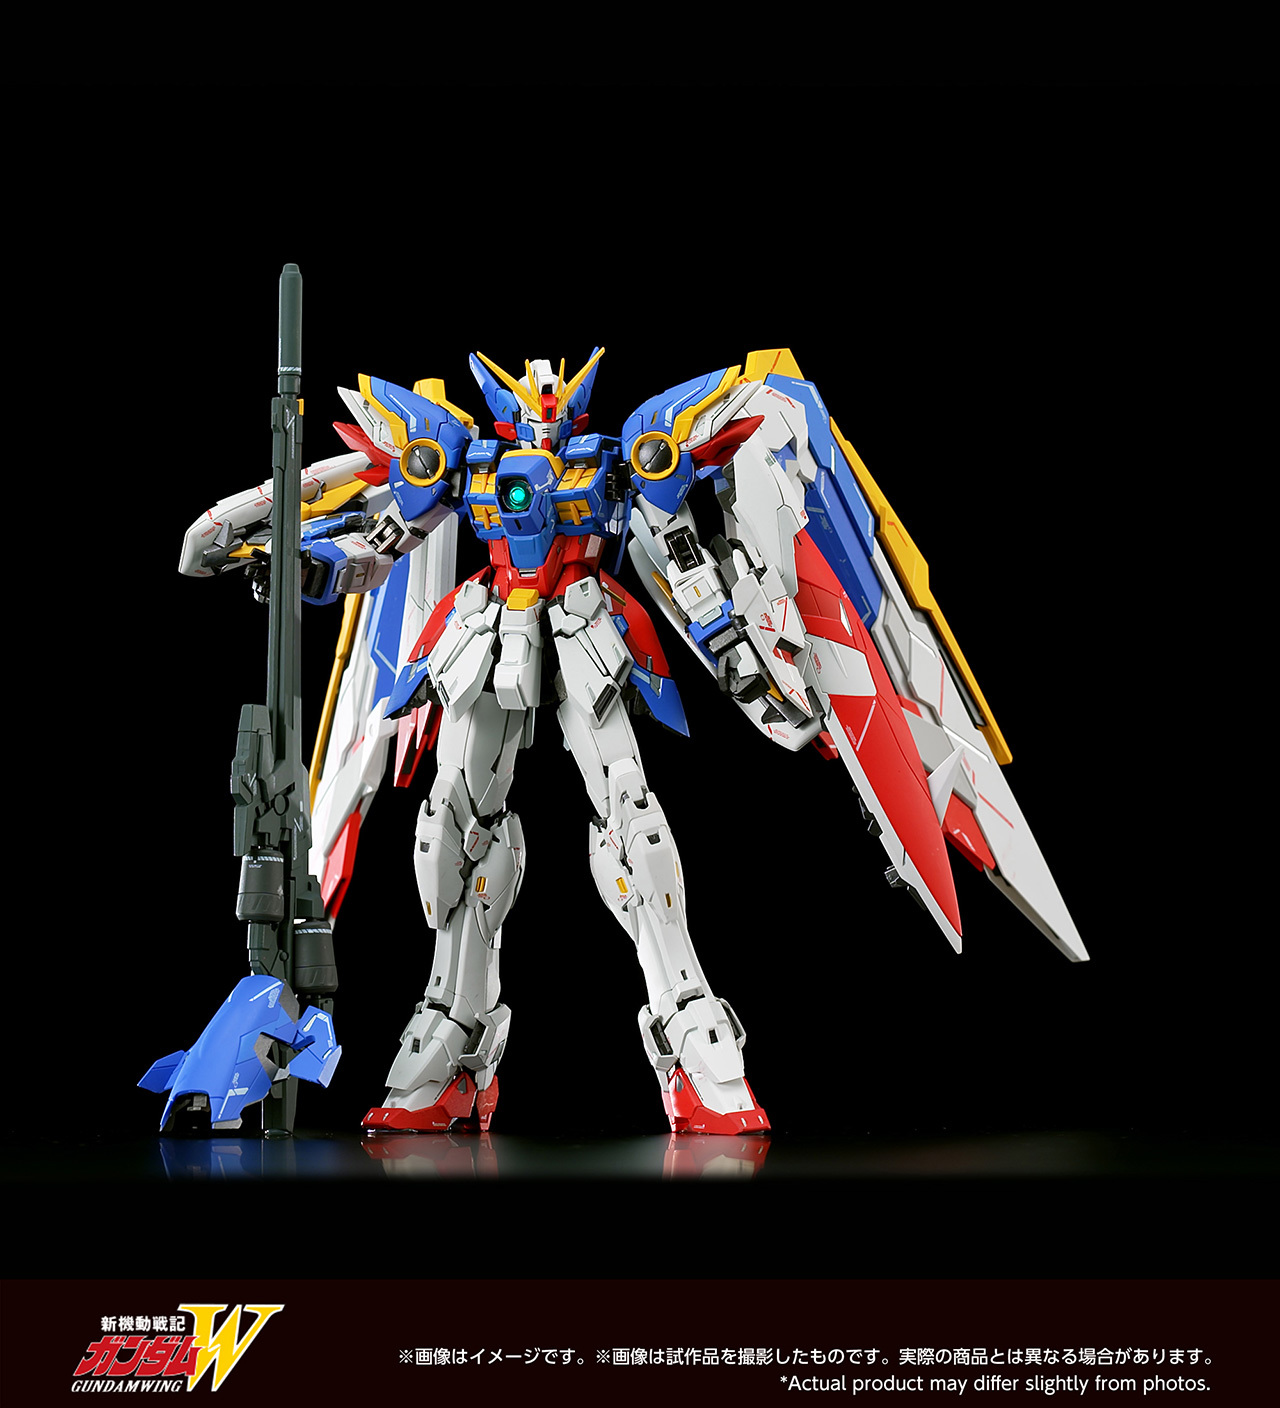 GUNDAM FIX FIGURATION METAL COMPOSITE ウイングガンダム（EW版）Early Color ver.、TAMASHII  NATION ONLINE 2021で展示 - 早耳ガンプラ情報局